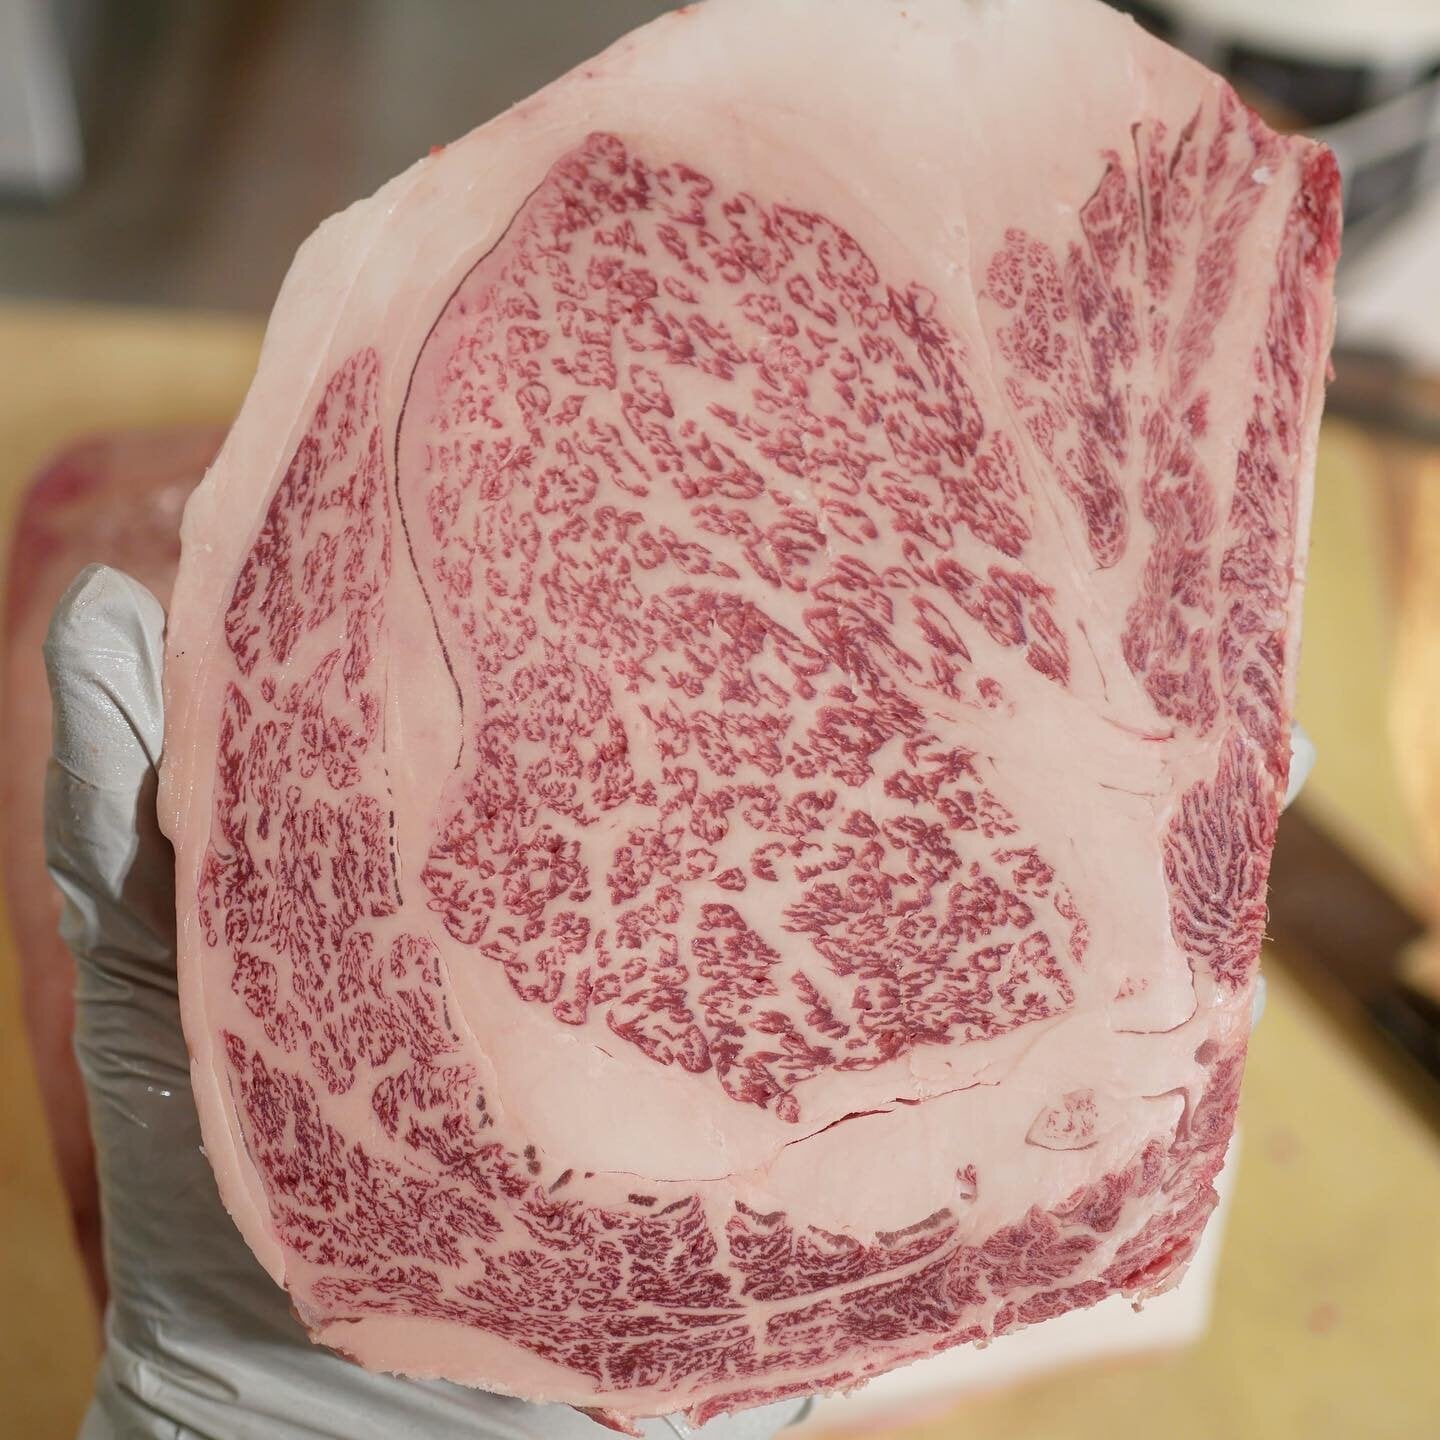 Brand New: NOT A5 Japanese A3 - Ribeye or Strip (2 steaks